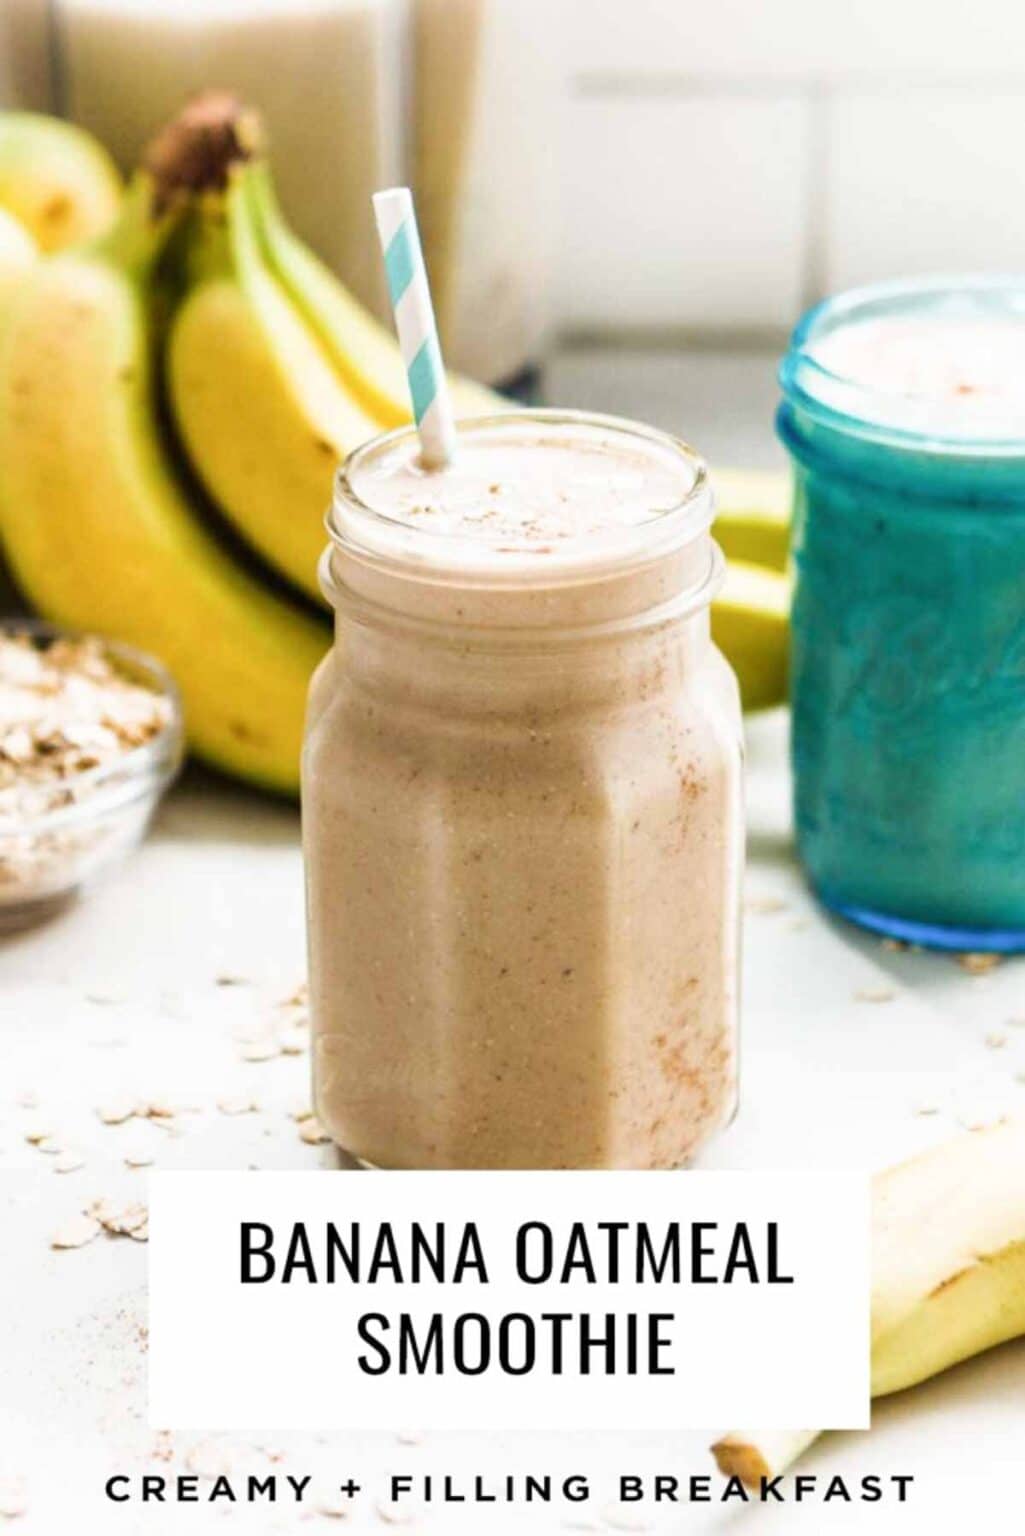 Banana Oatmeal Smoothie - Simple Green Smoothies